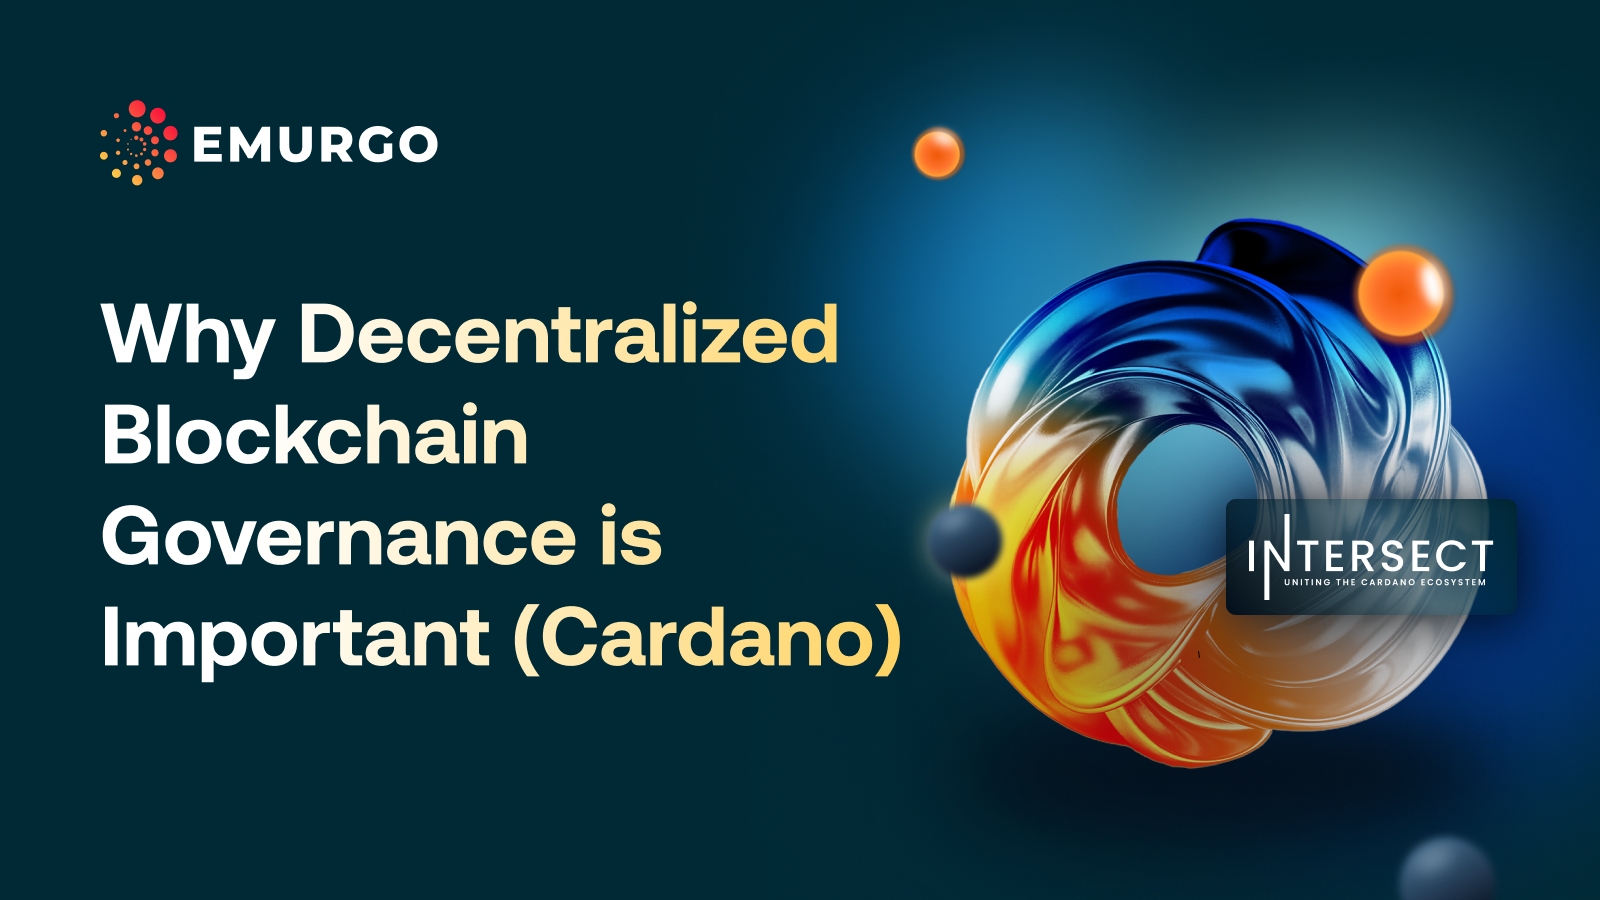 Why Decentralized Blockchain Governance is Important (Cardano)